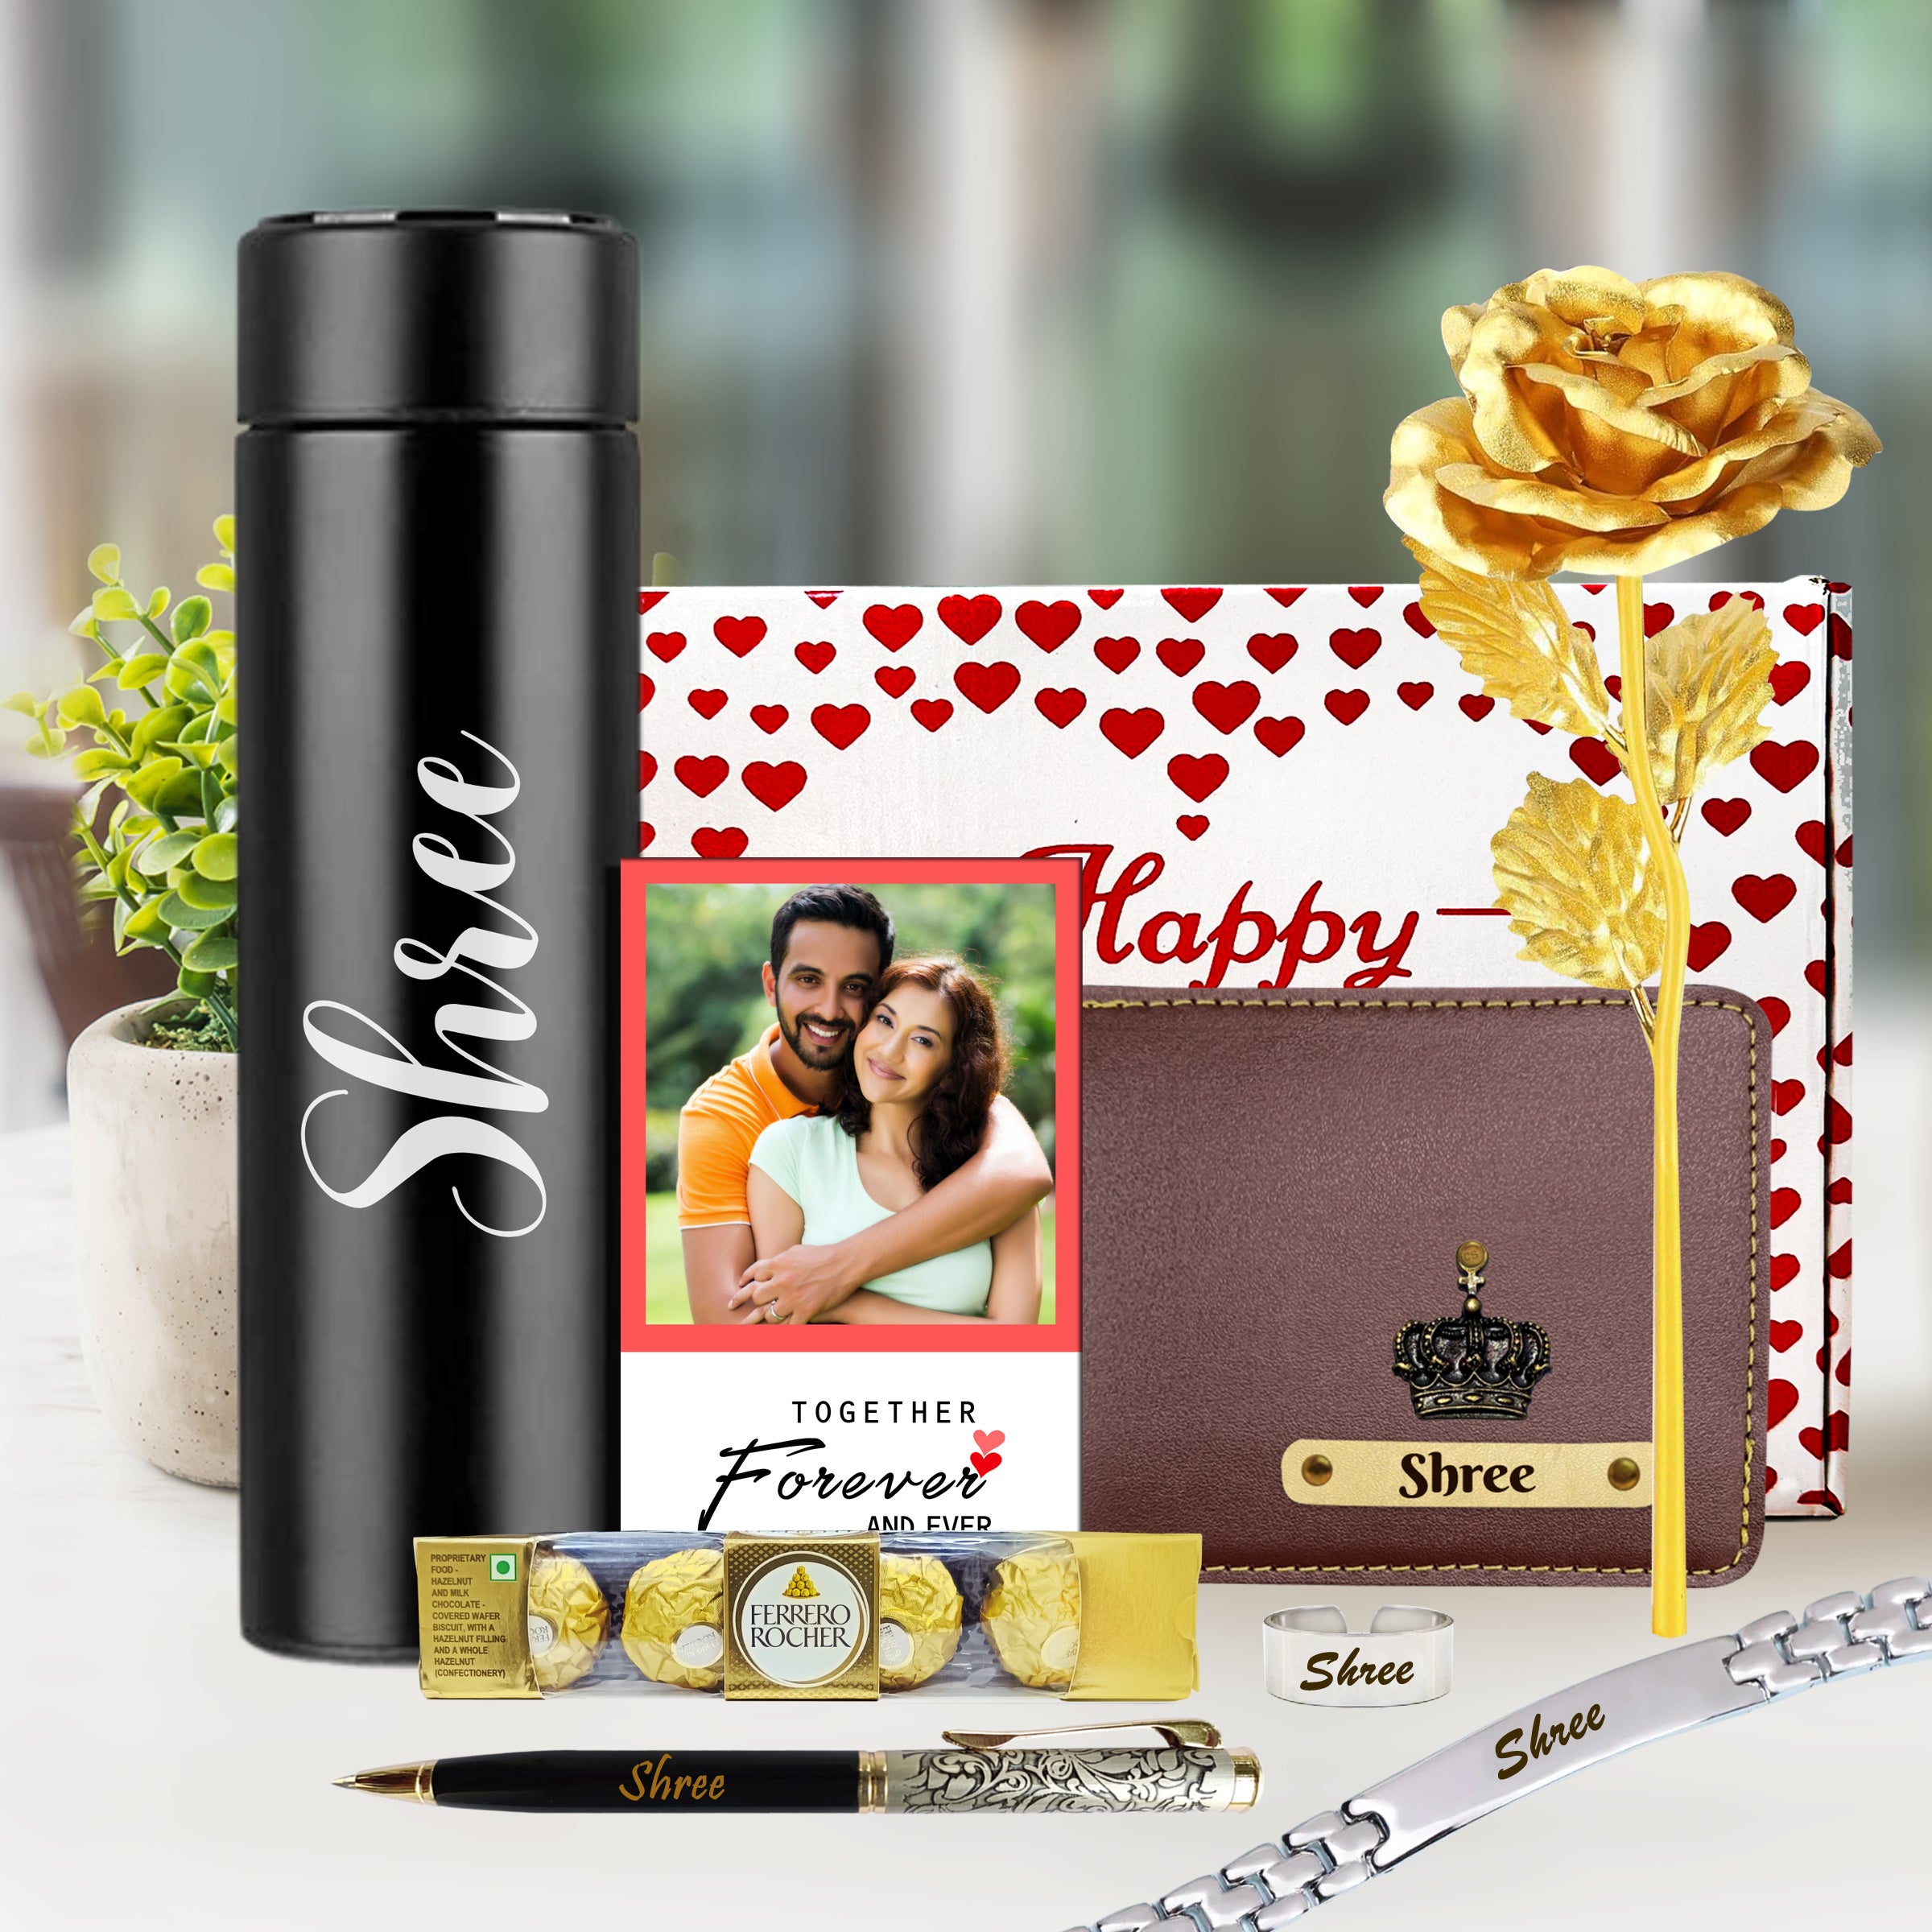 Buy ME & YOU Romantic Love Gift for Boyfreind/Girlfriend|Valentine's Day  Gifts for Lover|Rose Day, Purpose Day, Chocolate Day Gift|Unique Love Gift  Combo Hamper|Valentine's Week Day Gift Online at Low Prices in India -